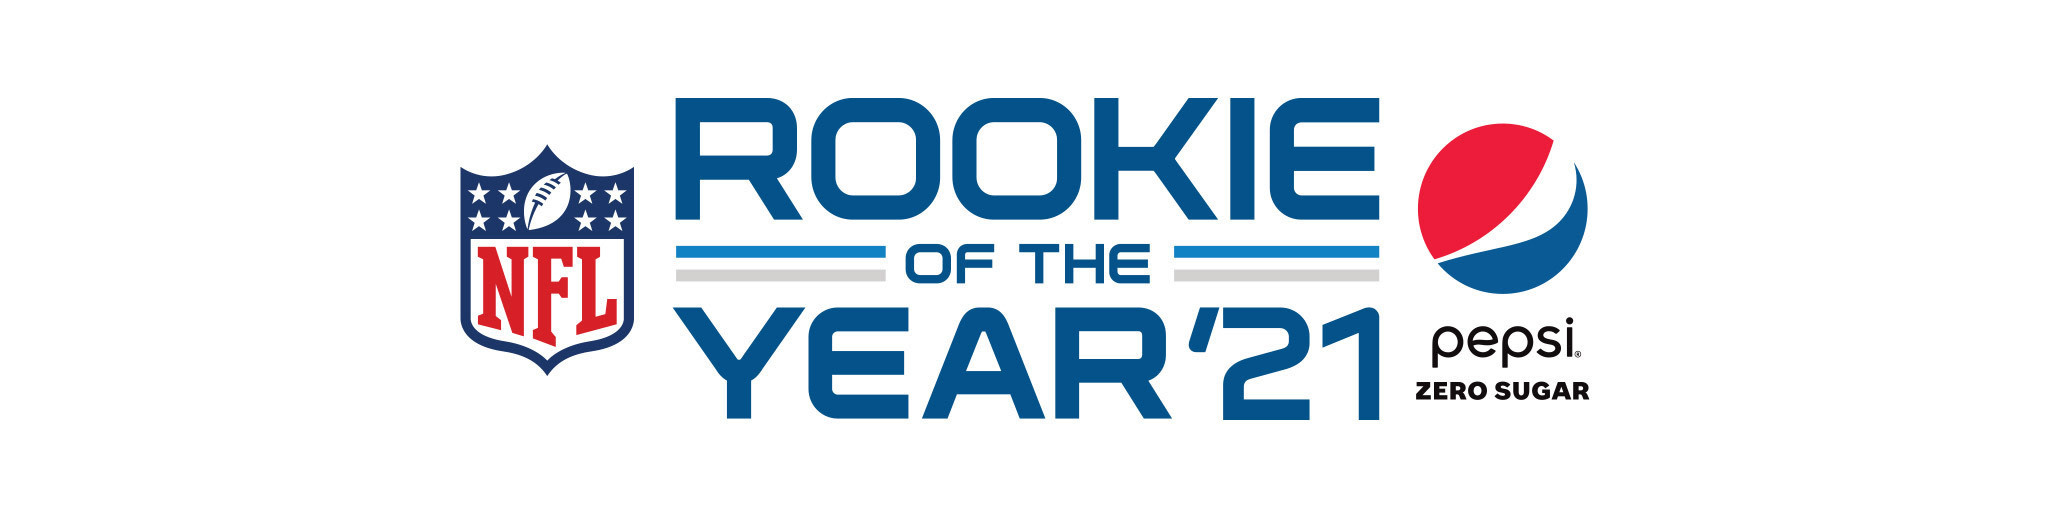 rookie of the year nfl pepsi voting